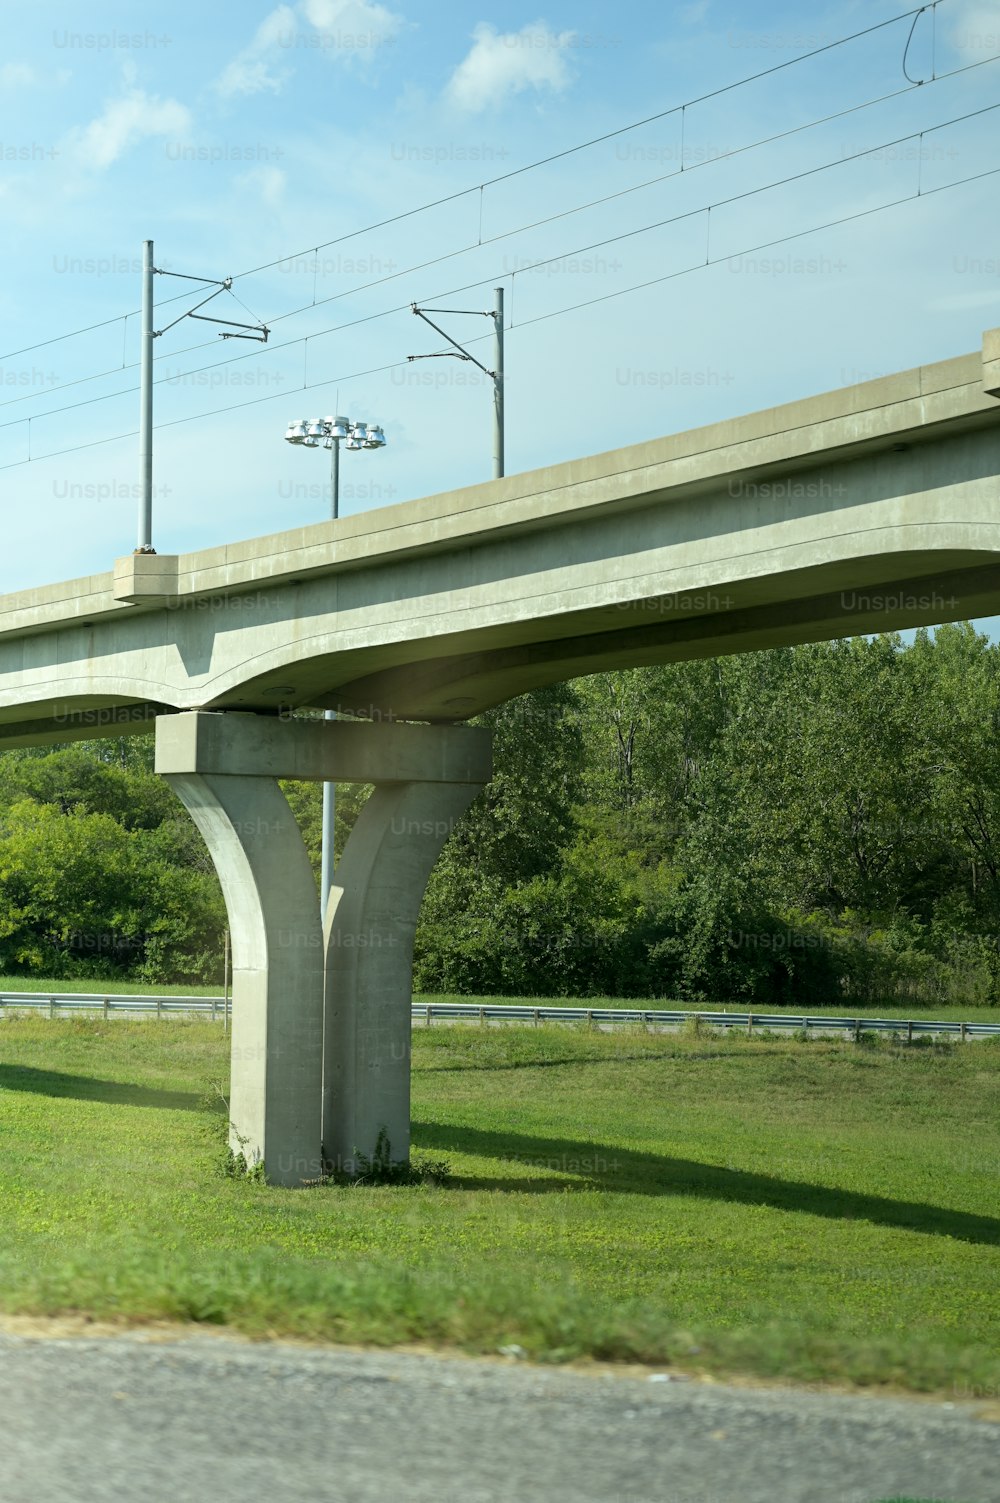 a highway overpass with power lines above it